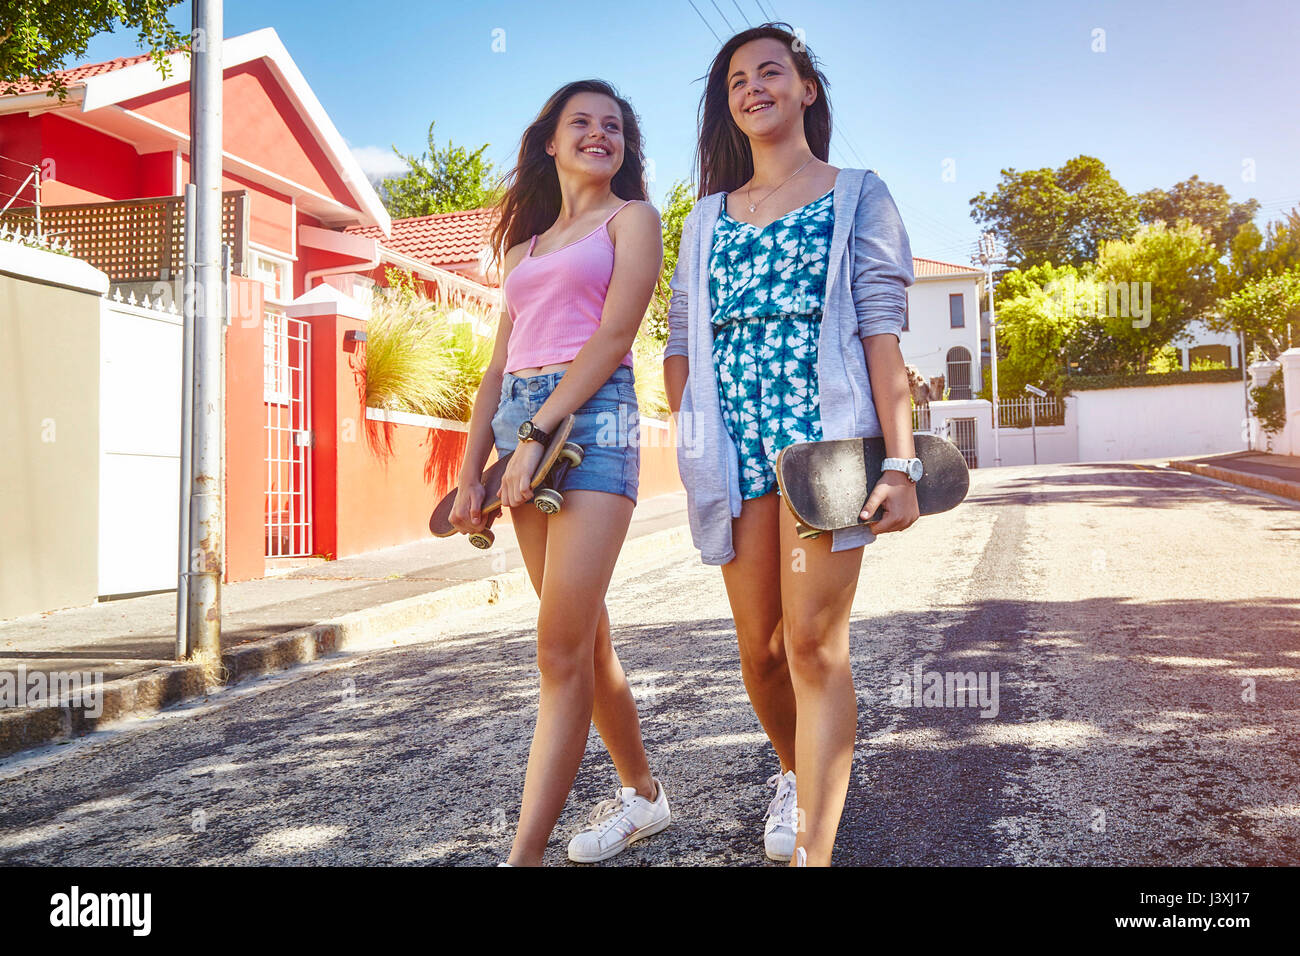 Two female friends, walking outdoors, carrying skateboards Stock Photo